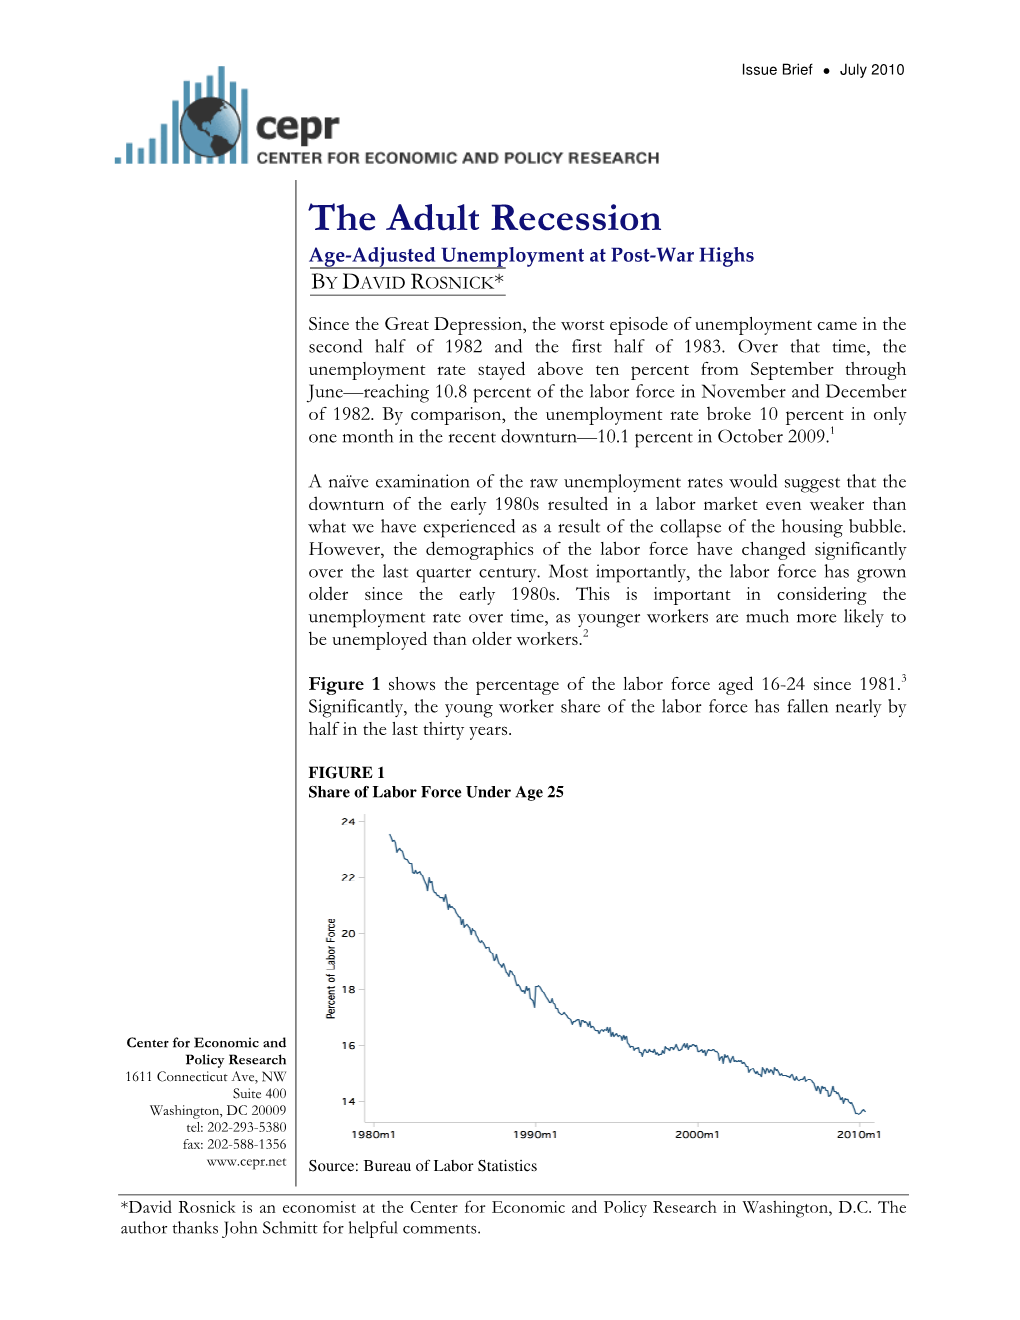 The Adult Recession Age-Adjusted Unemployment at Post-War Highs by DAVID ROSNICK *